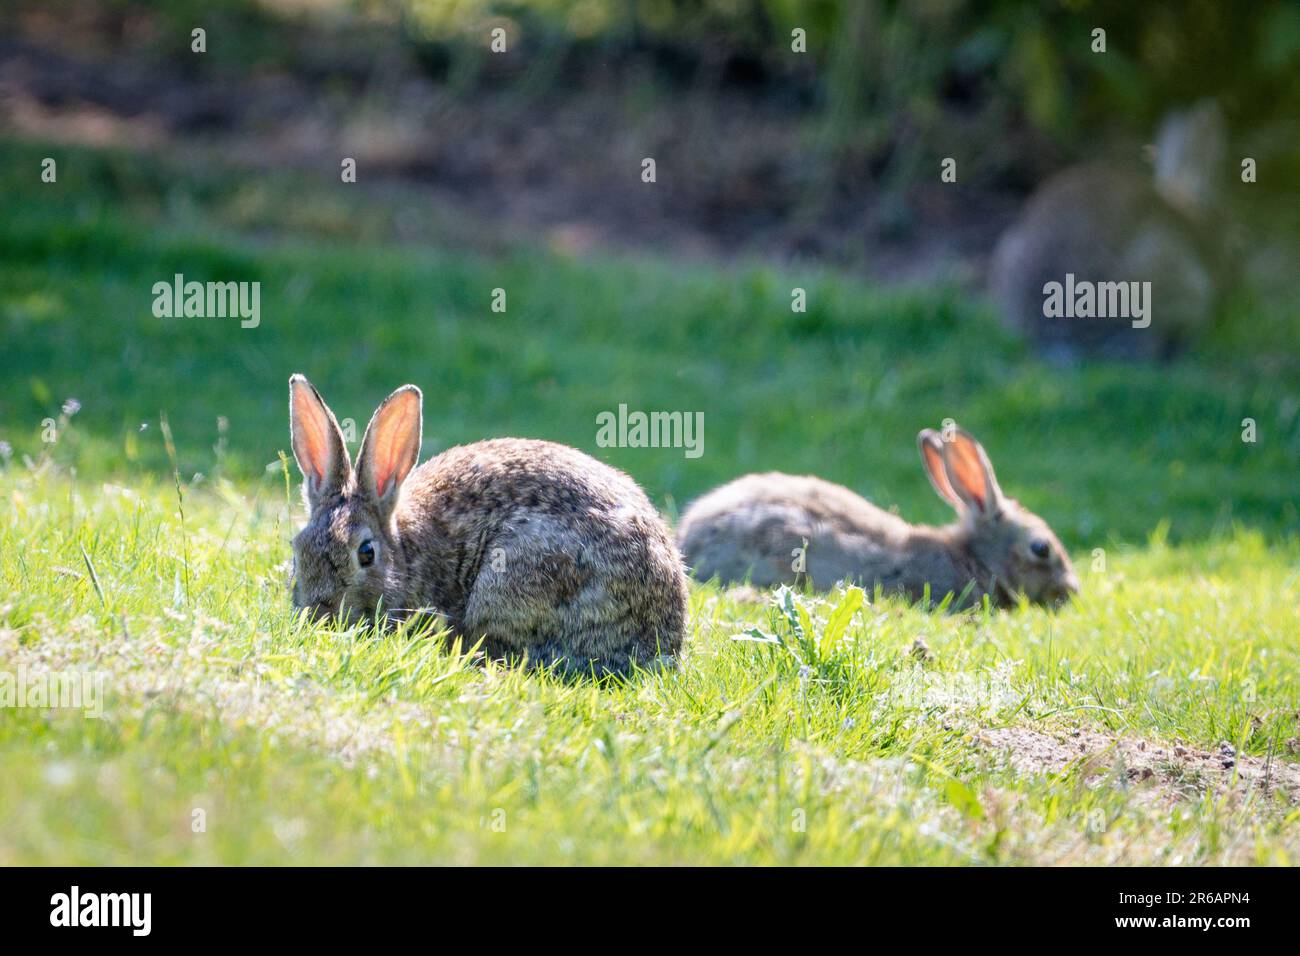 Two wild rabbits on the grass Stock Photo